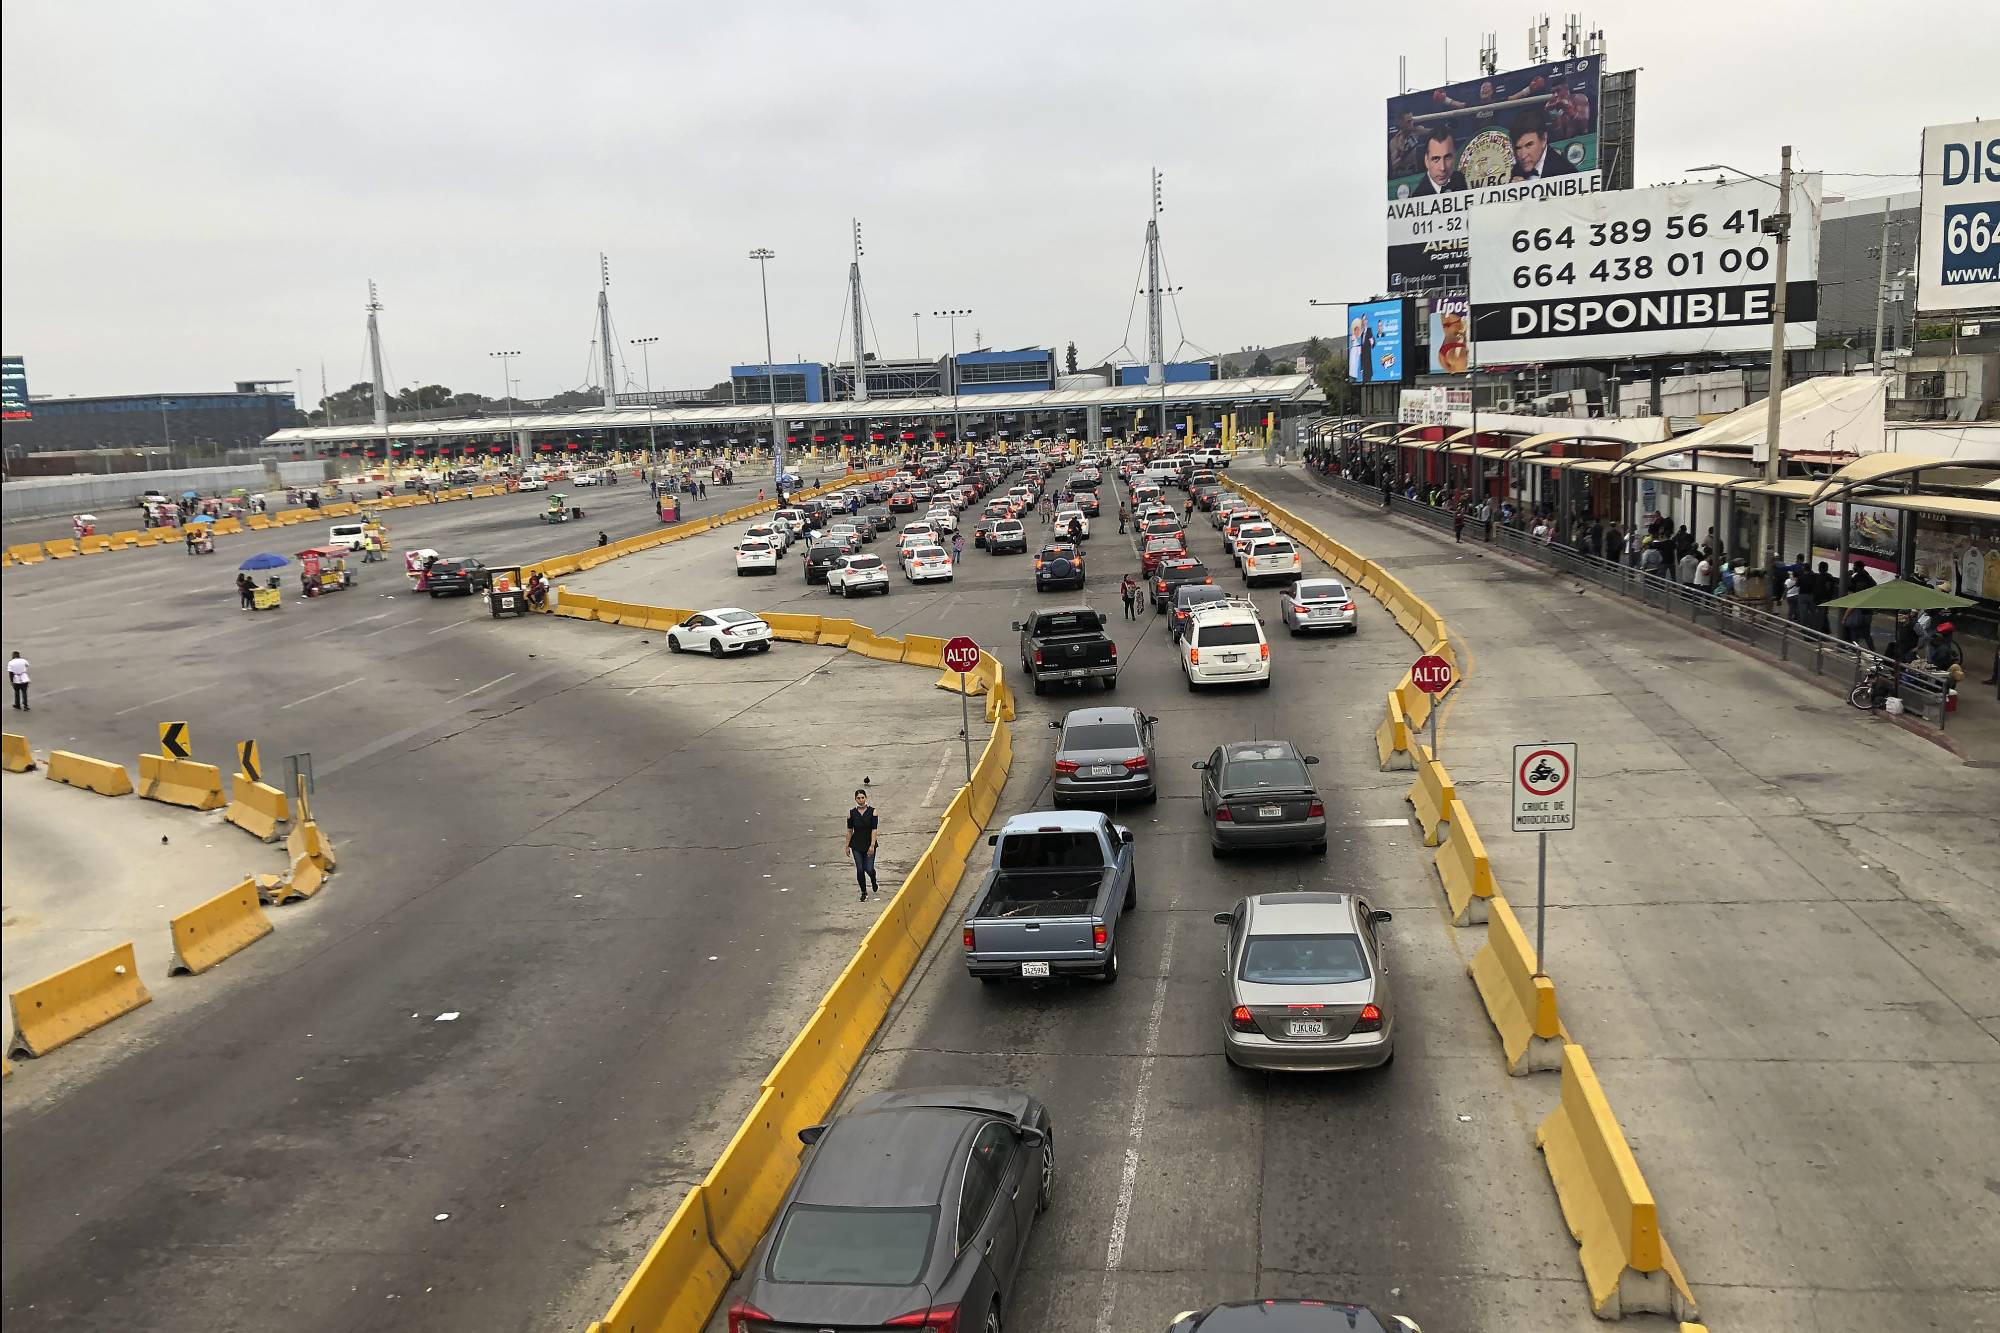 Cars wait in line to enter the United States at San Diego's San Ysidro border crossing, Tuesday, Aug. 25, 2020, in Tijuana, Mexico. A Trump administration crackdown on nonessential travel coming from Mexico amid the coronavirus pandemic has created massive bottlenecks at the border, with drivers reporting waits of up to 10 hours to get into the U.S. (AP Photo/Elliot Spagat)